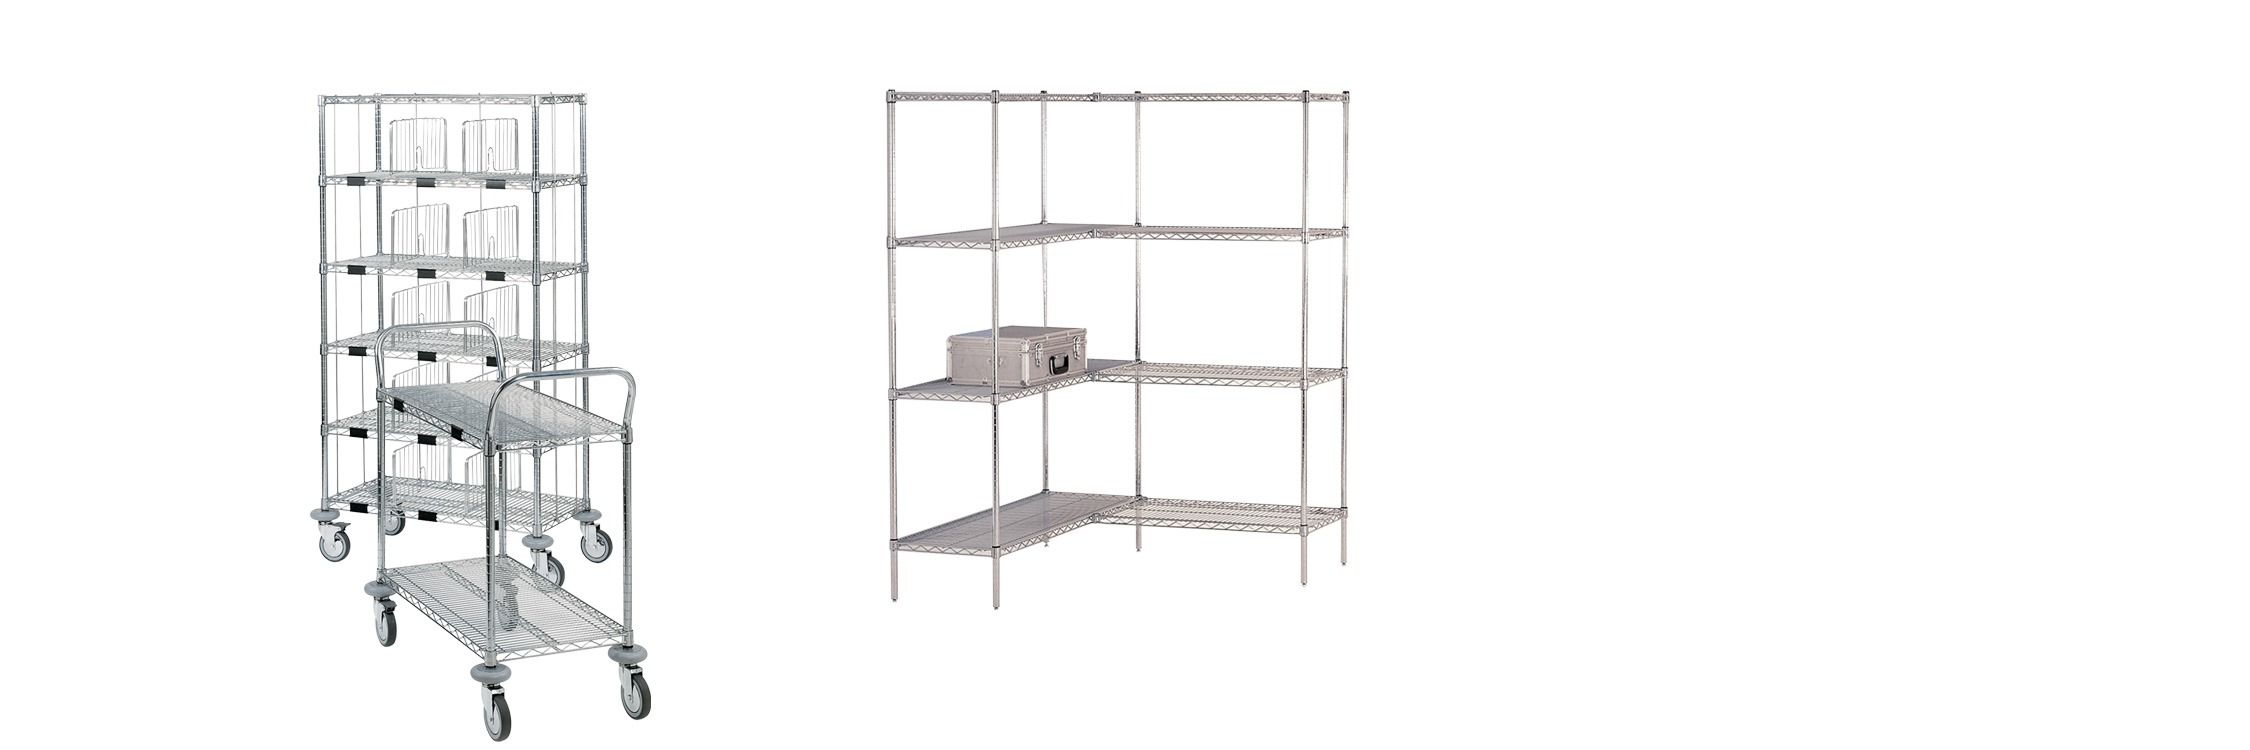 MOSYS is a modular system to build shelves and trolleys without using tools